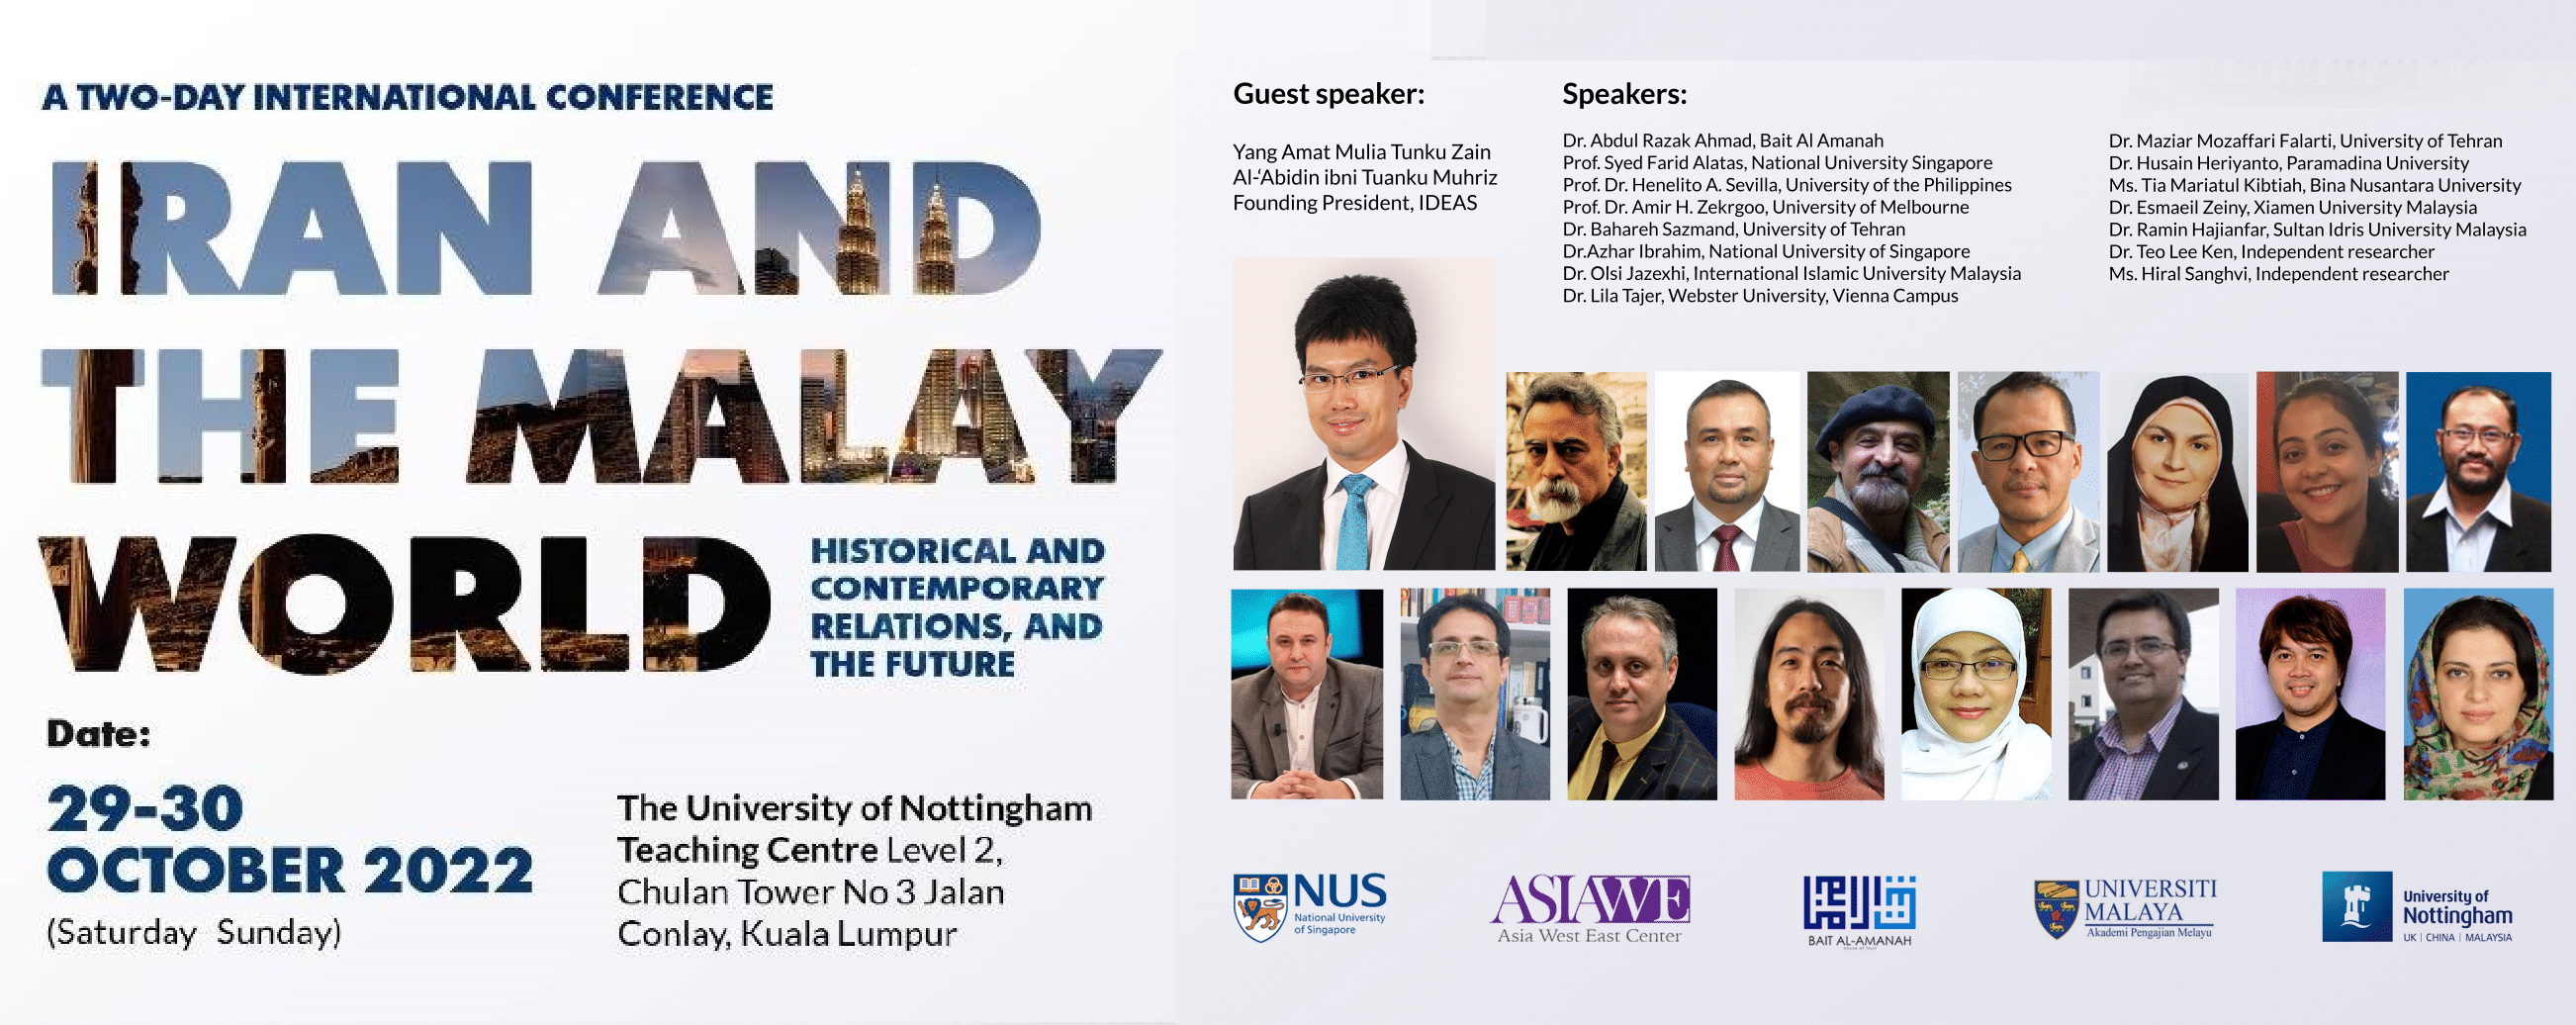 A Two-Day International Conference Iran and the Malay World Historical and Contemporary Relations, and the Future